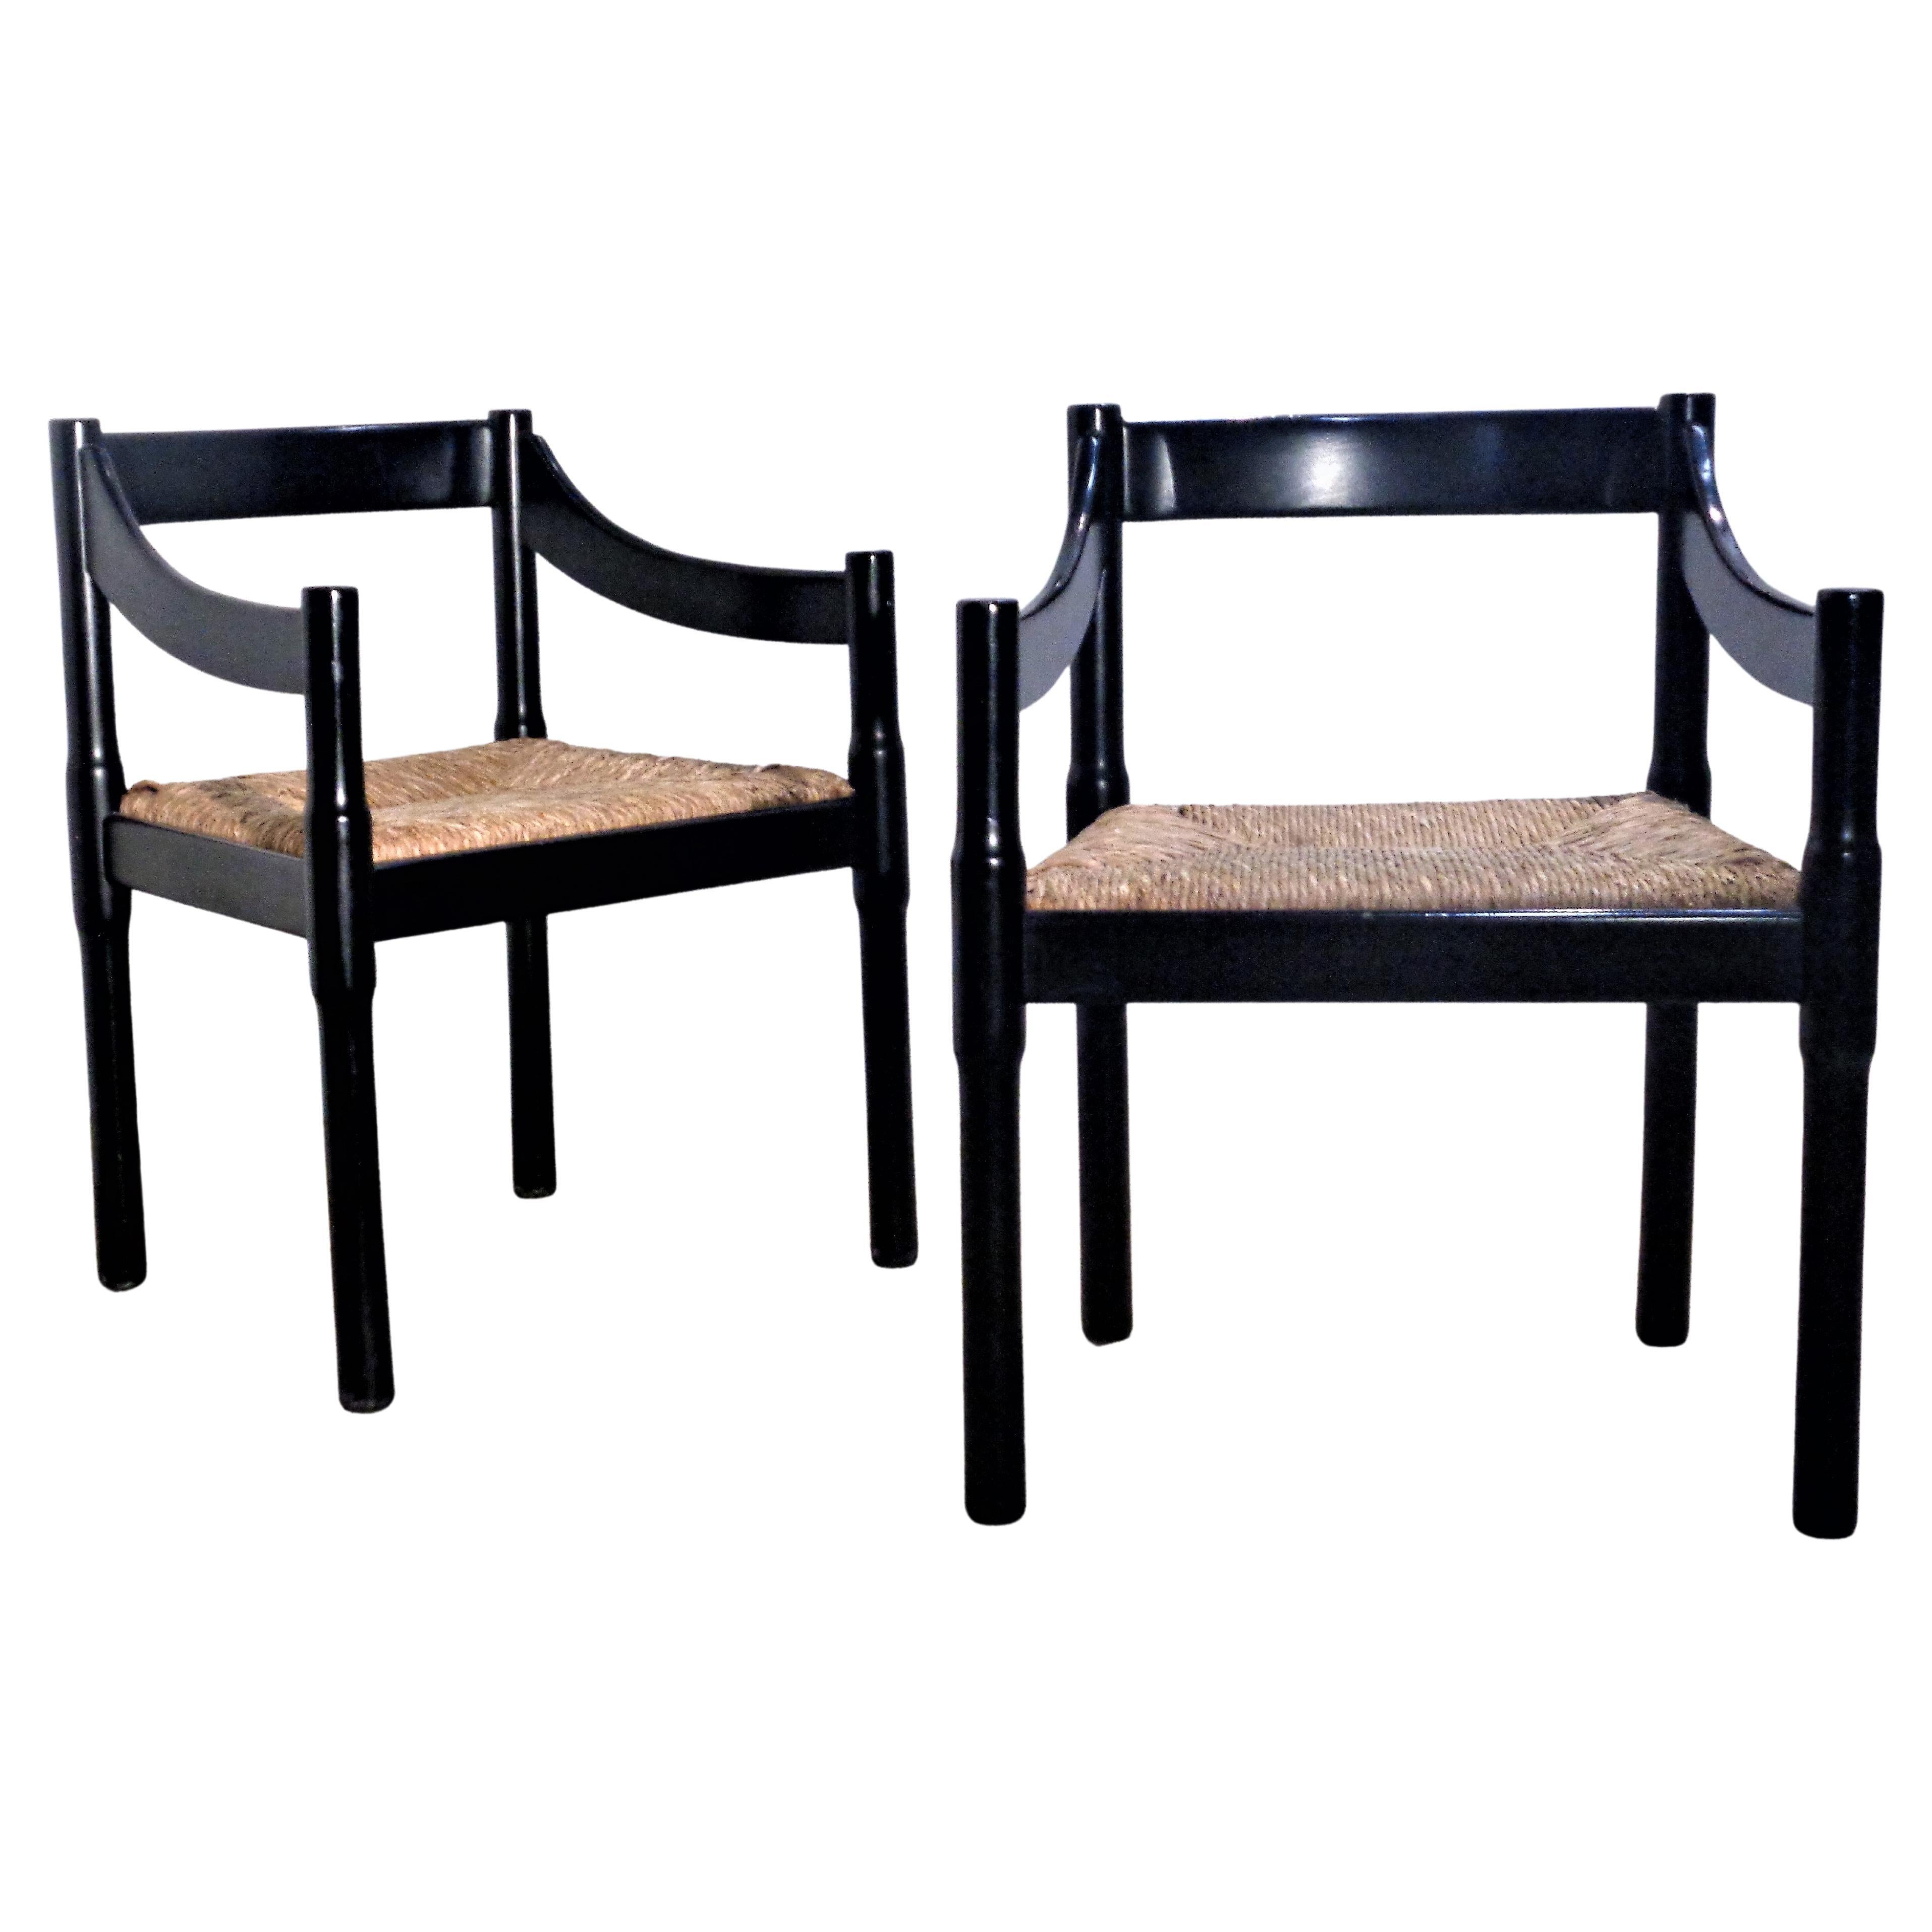 Vico Magistretti pair of model 'Carimate' dining chairs / armchairs in very good original black lacquered beech frames and natural woven rush seats. Made in Italy, circa 1960's. Look at all pictures and read condition report in comment section.